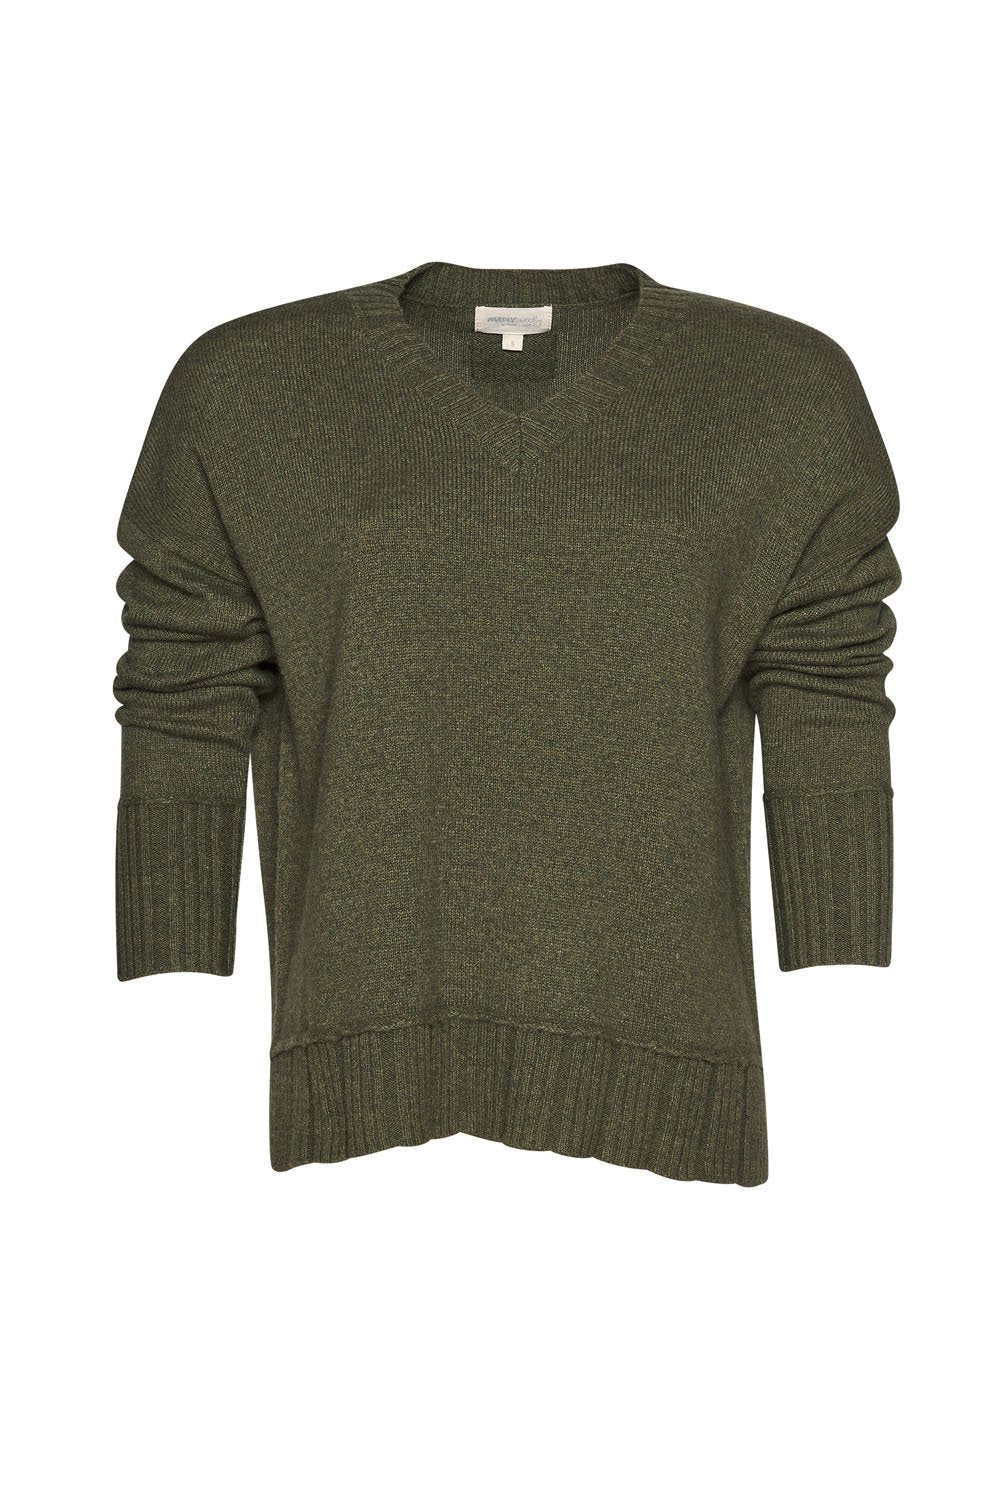 Madly Sweetly - Girls Club Women's Sweater (Olive)